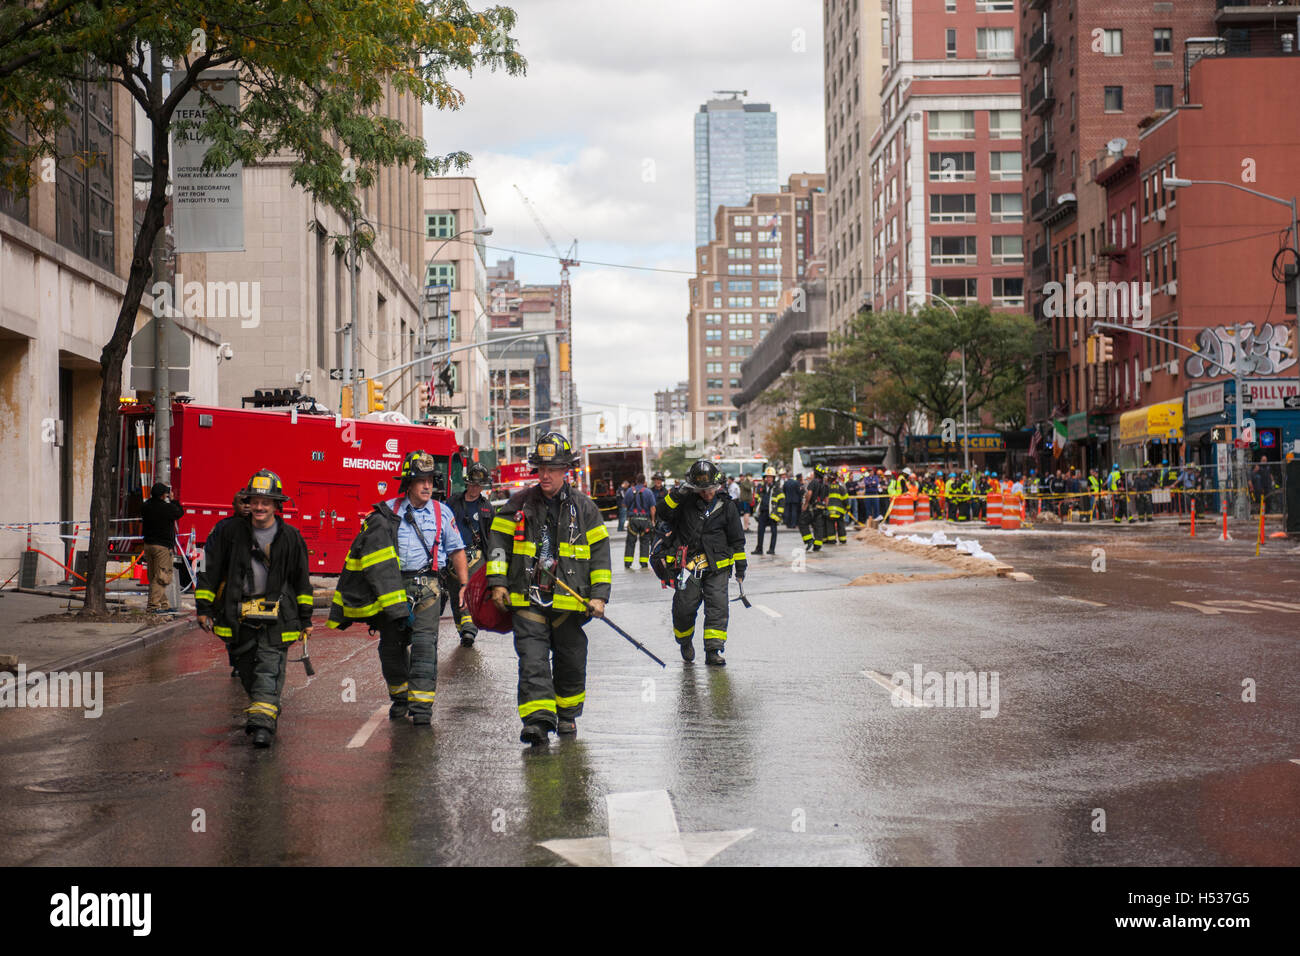 FDNY firefighters respond to a watermain break  in the Chelsea neighborhood of New York on Wednesday, October 12, 2016. The watermain break caused water to gush but it was mostly contained to the street safely running into storm drains. (© Richard B. Levine) Stock Photo